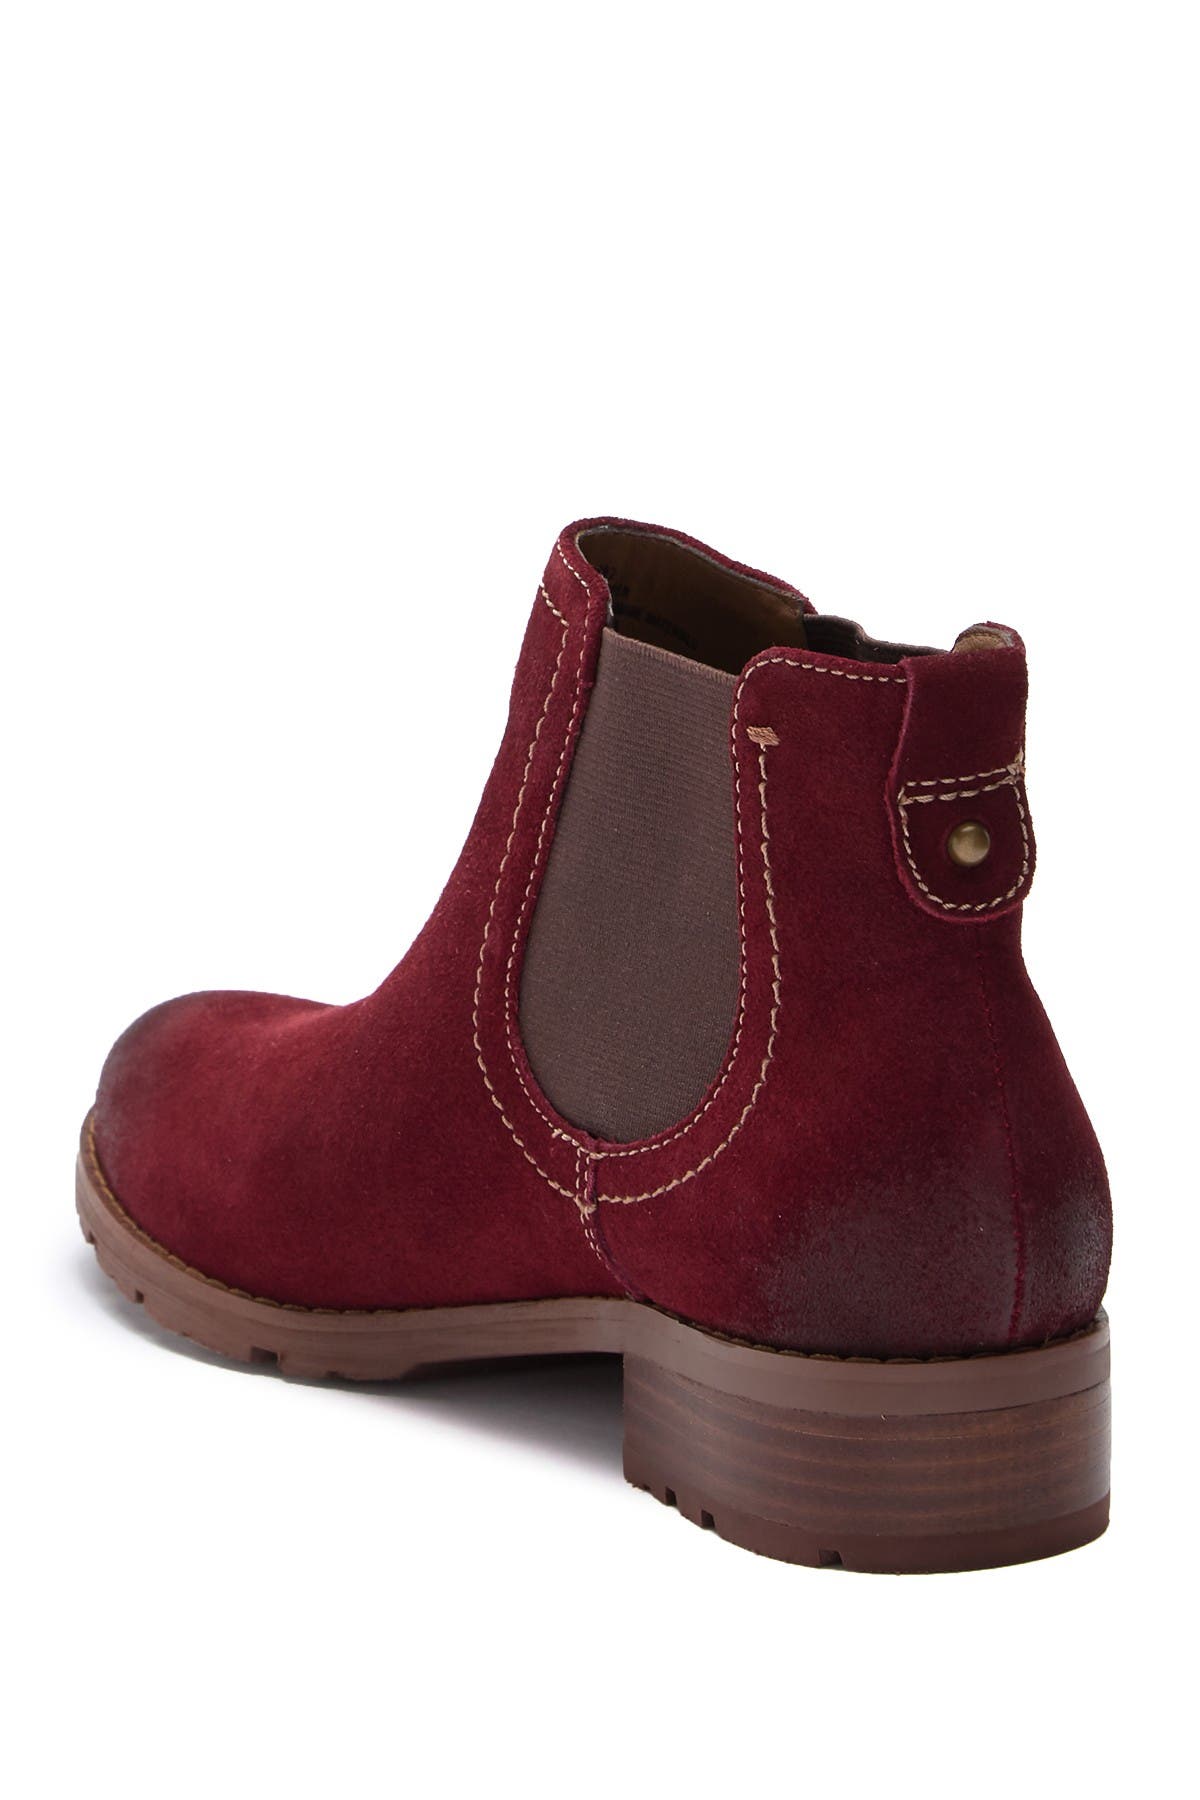 Sofft | Sherwood Suede Chelsea Boot 